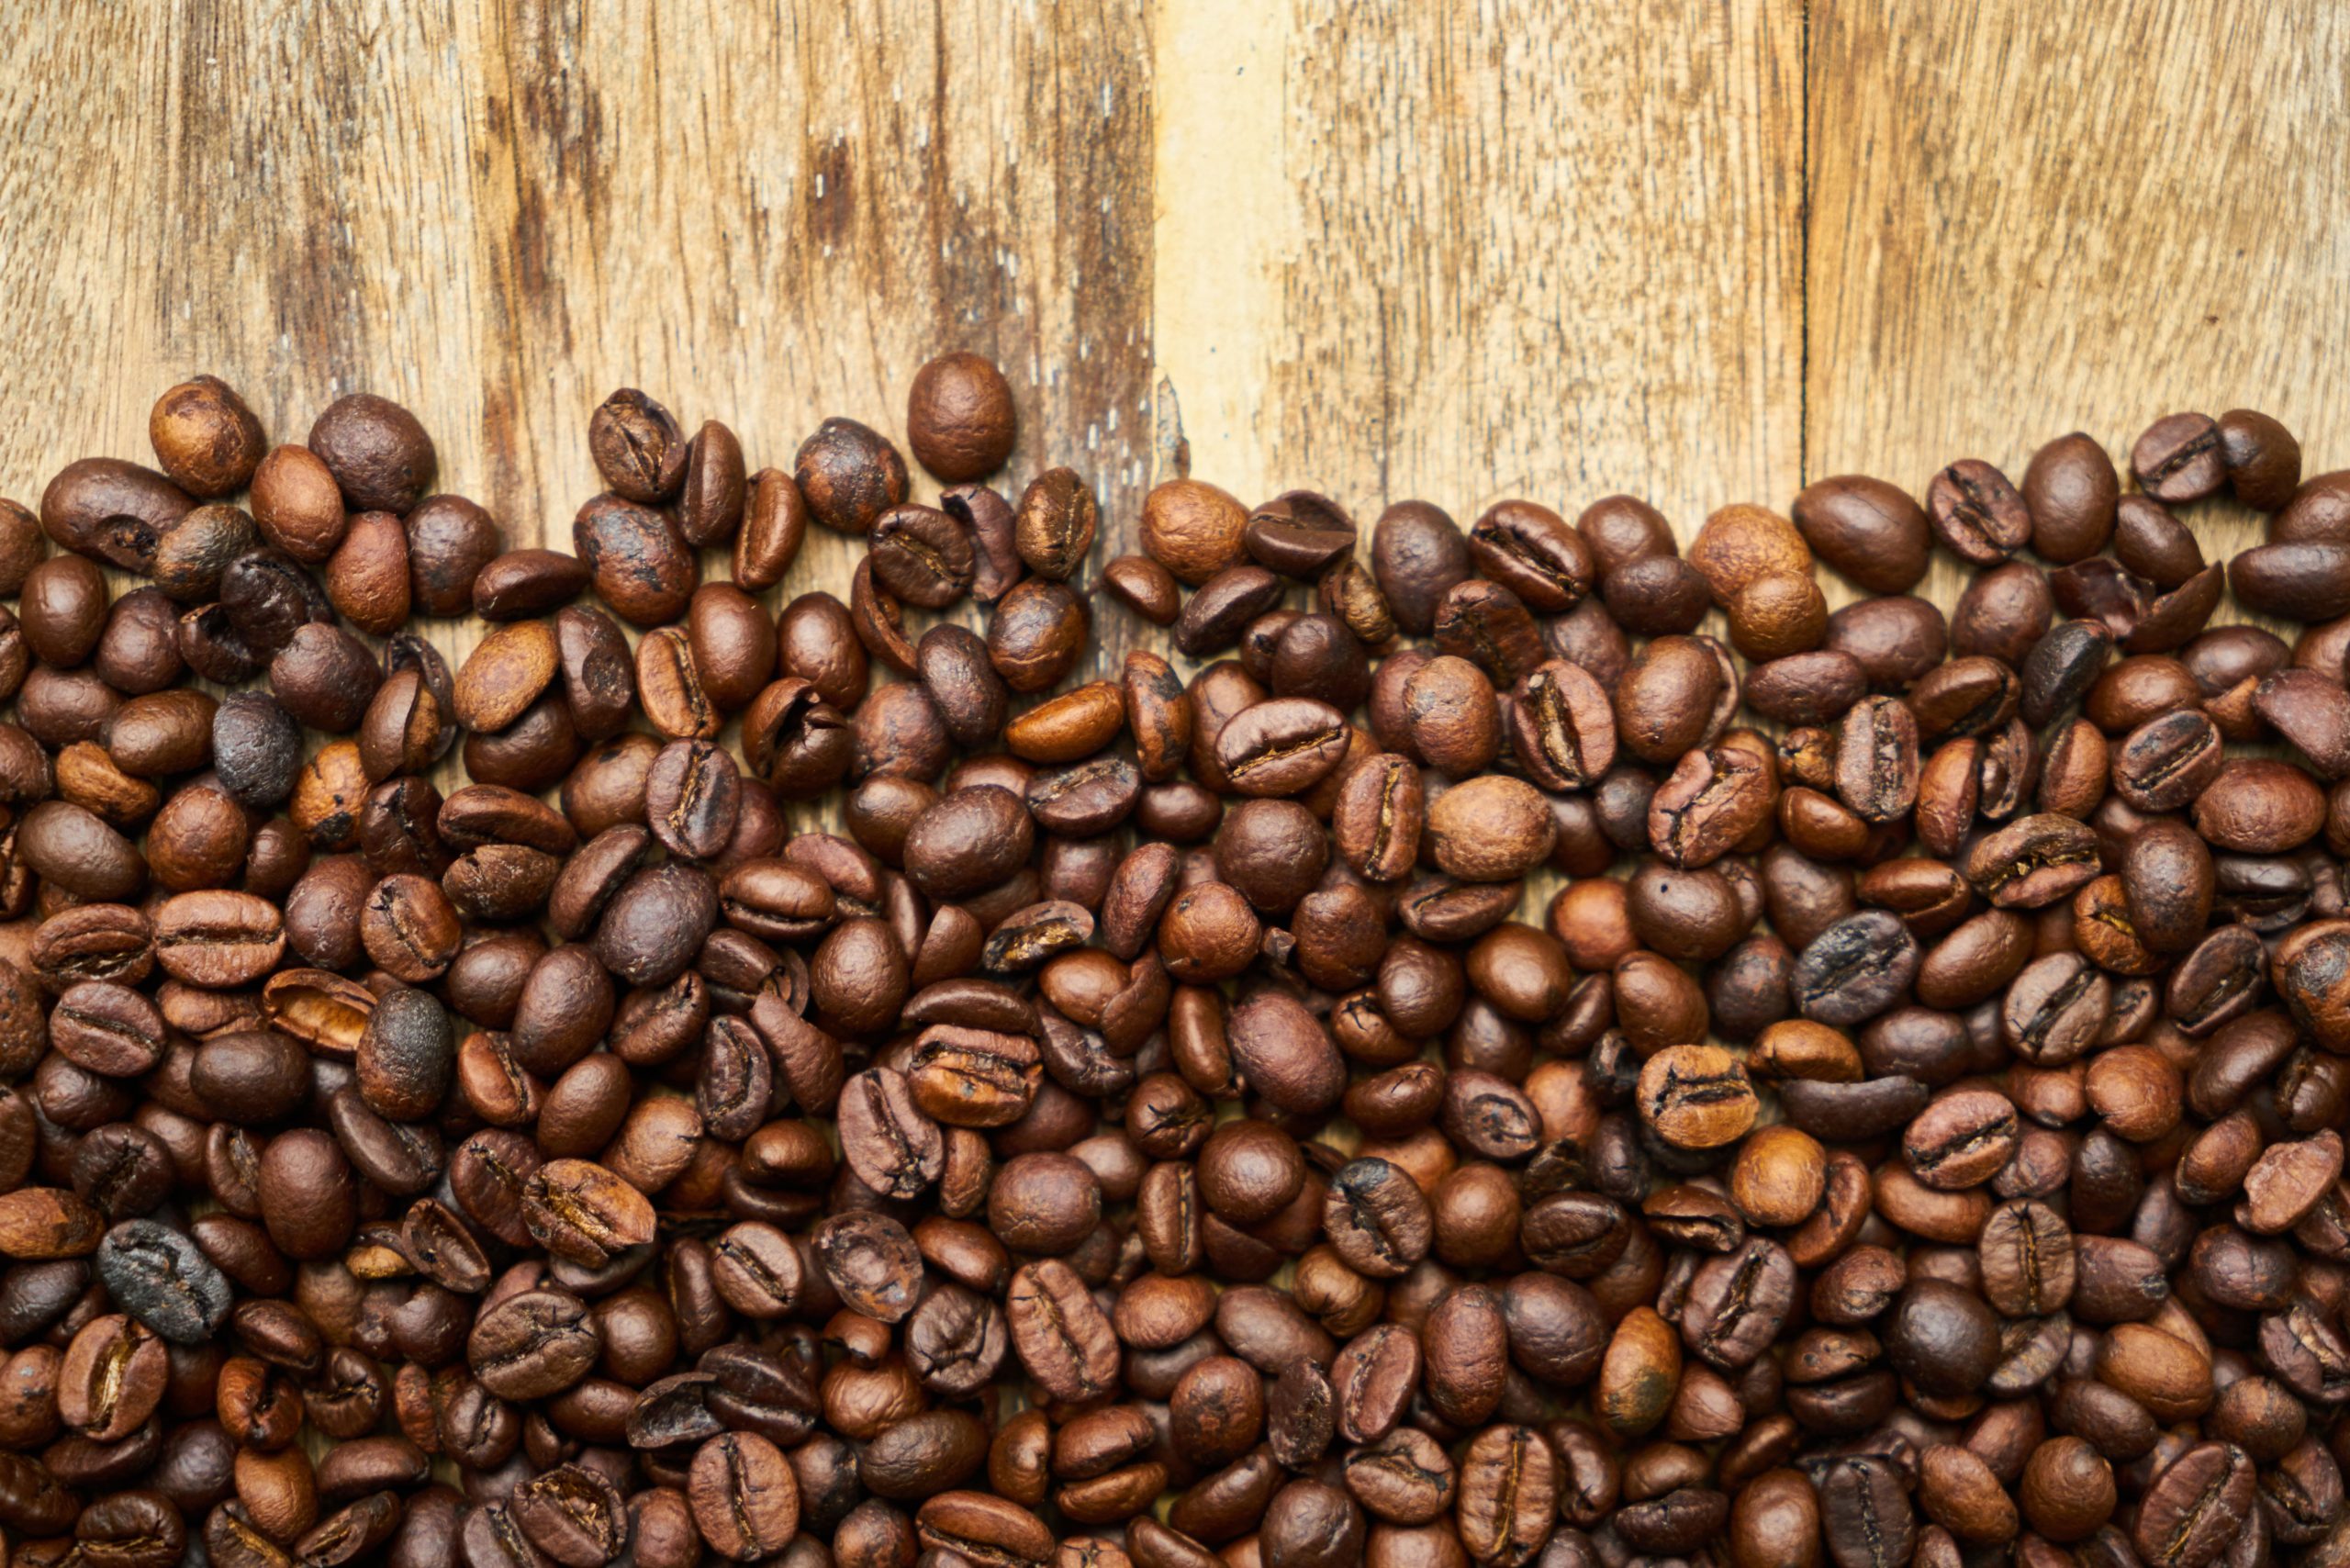 Coffee beans lot wallpaper, surface, food and drink, roasted coffee bean